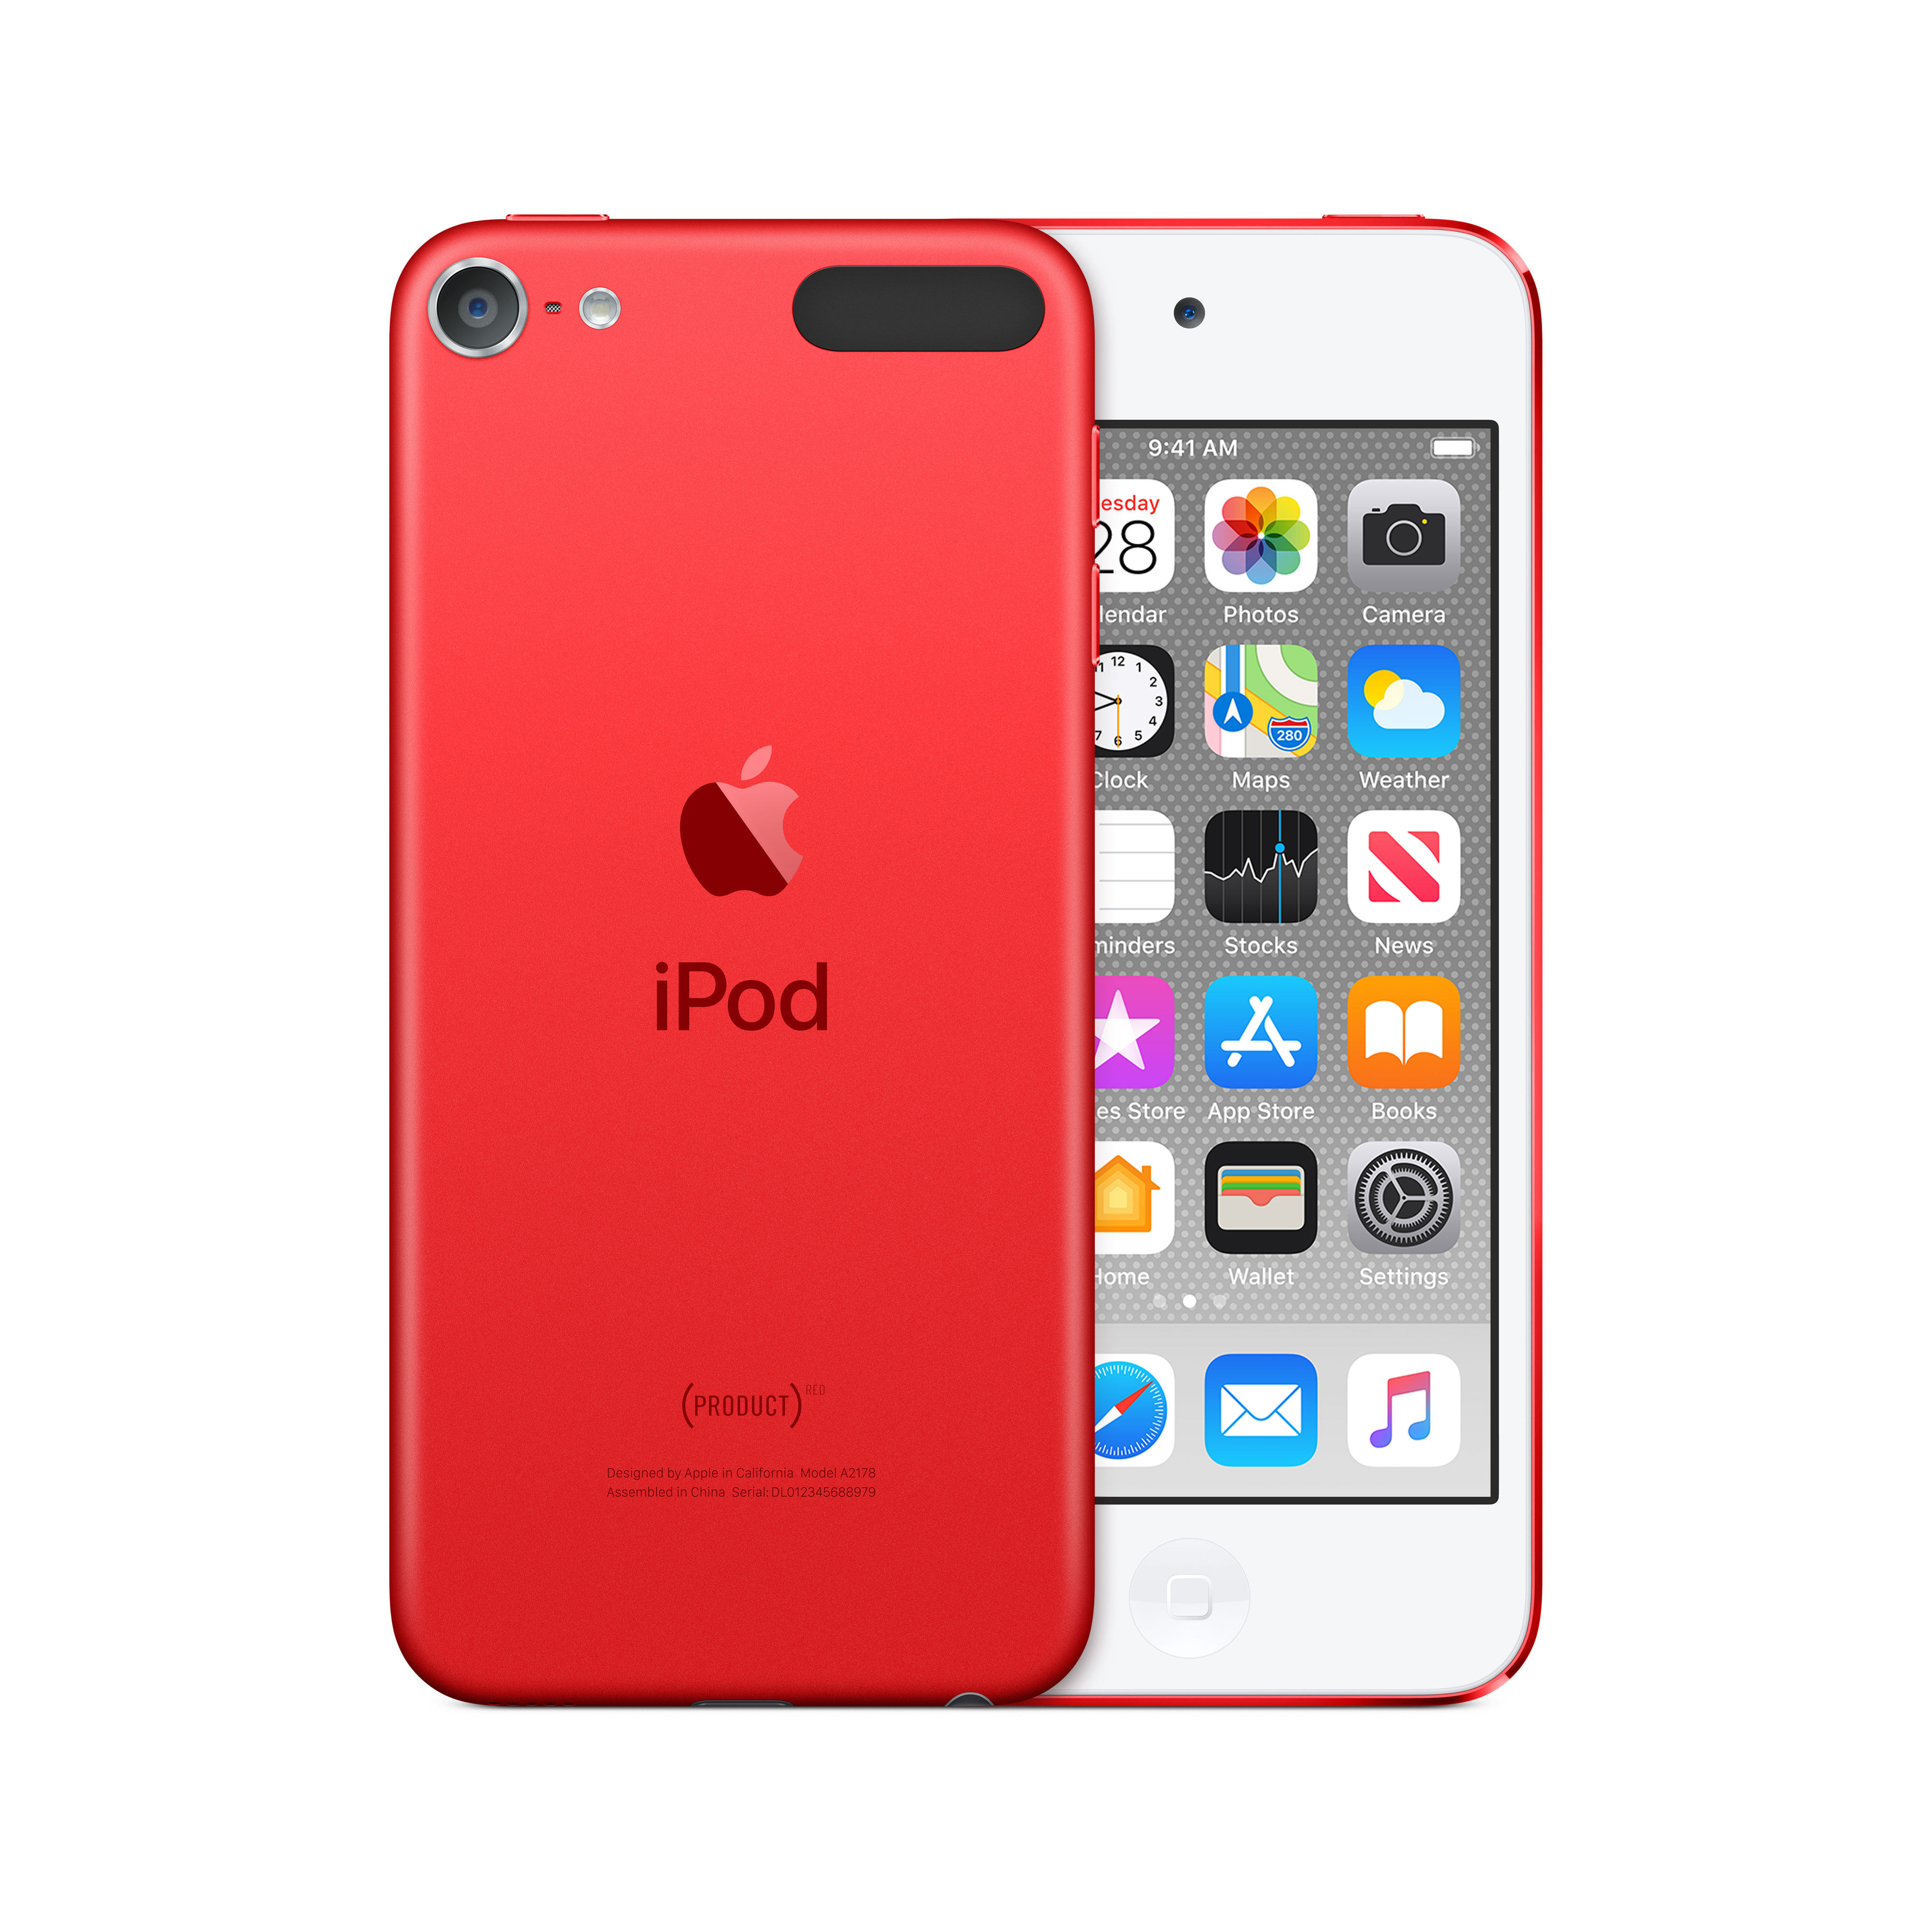 Apple iPod touch 7th Generation 128GB - PRODUCT(RED) (New Model) - image 1 of 6